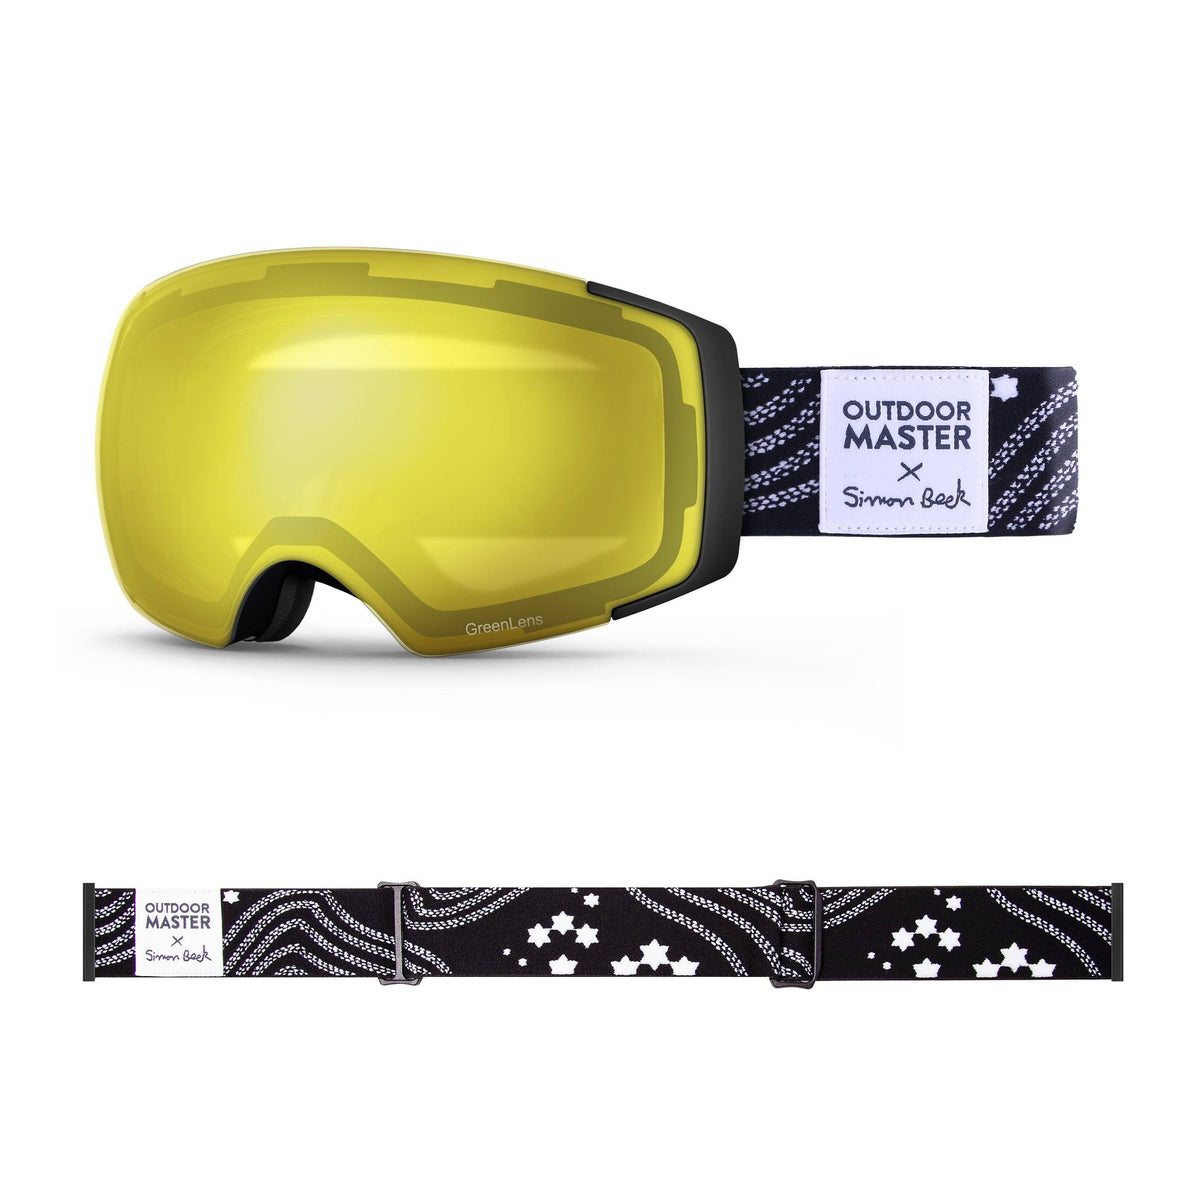 OutdoorMaster x Simon Beck Ski Goggles Pro Series - Snowshoeing Art Limited Edition OutdoorMaster GreenLens VLT 75% TAC Yellow Lens Polarized Star Road-Black